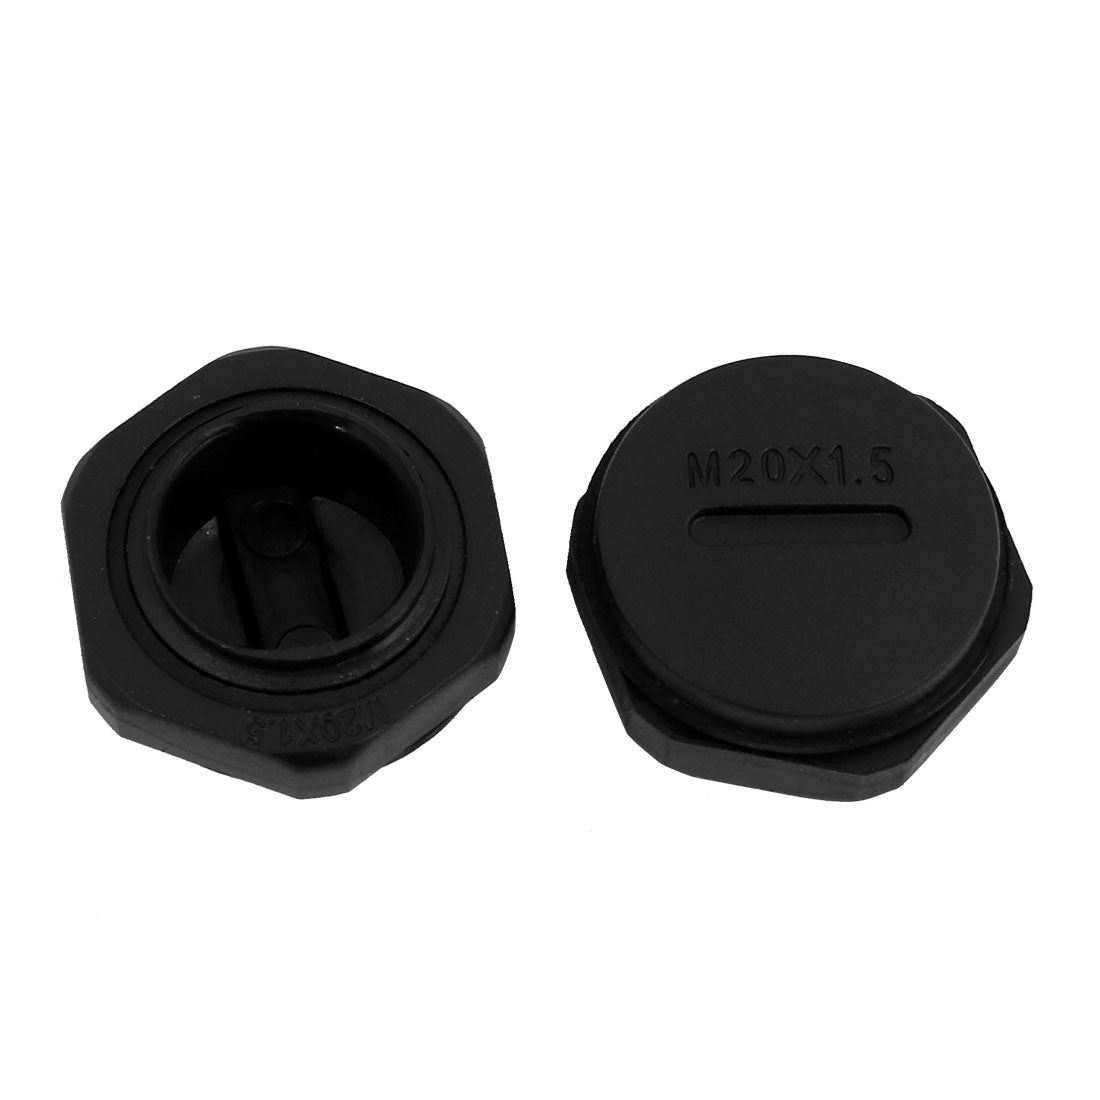 uxcell Uxcell 10pcs M20 x 1.5mm Nylon Male Threaded Cable Gland Cap Round Screw-in Cover Black